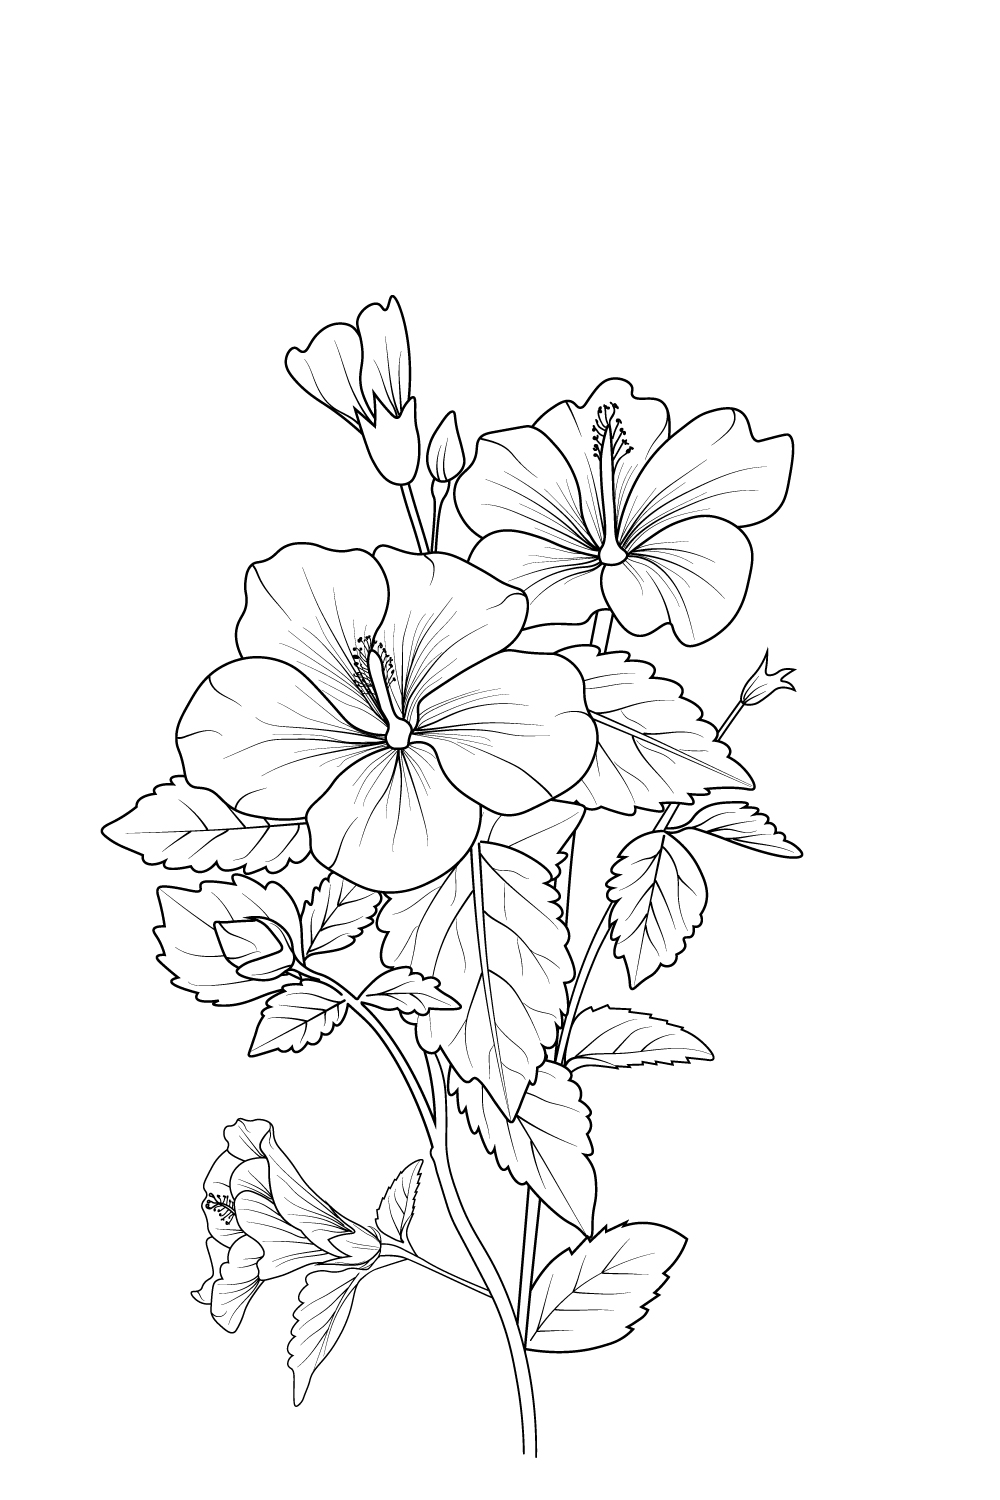 Hibiscus flower sketch of pencil line drawing Vector Image